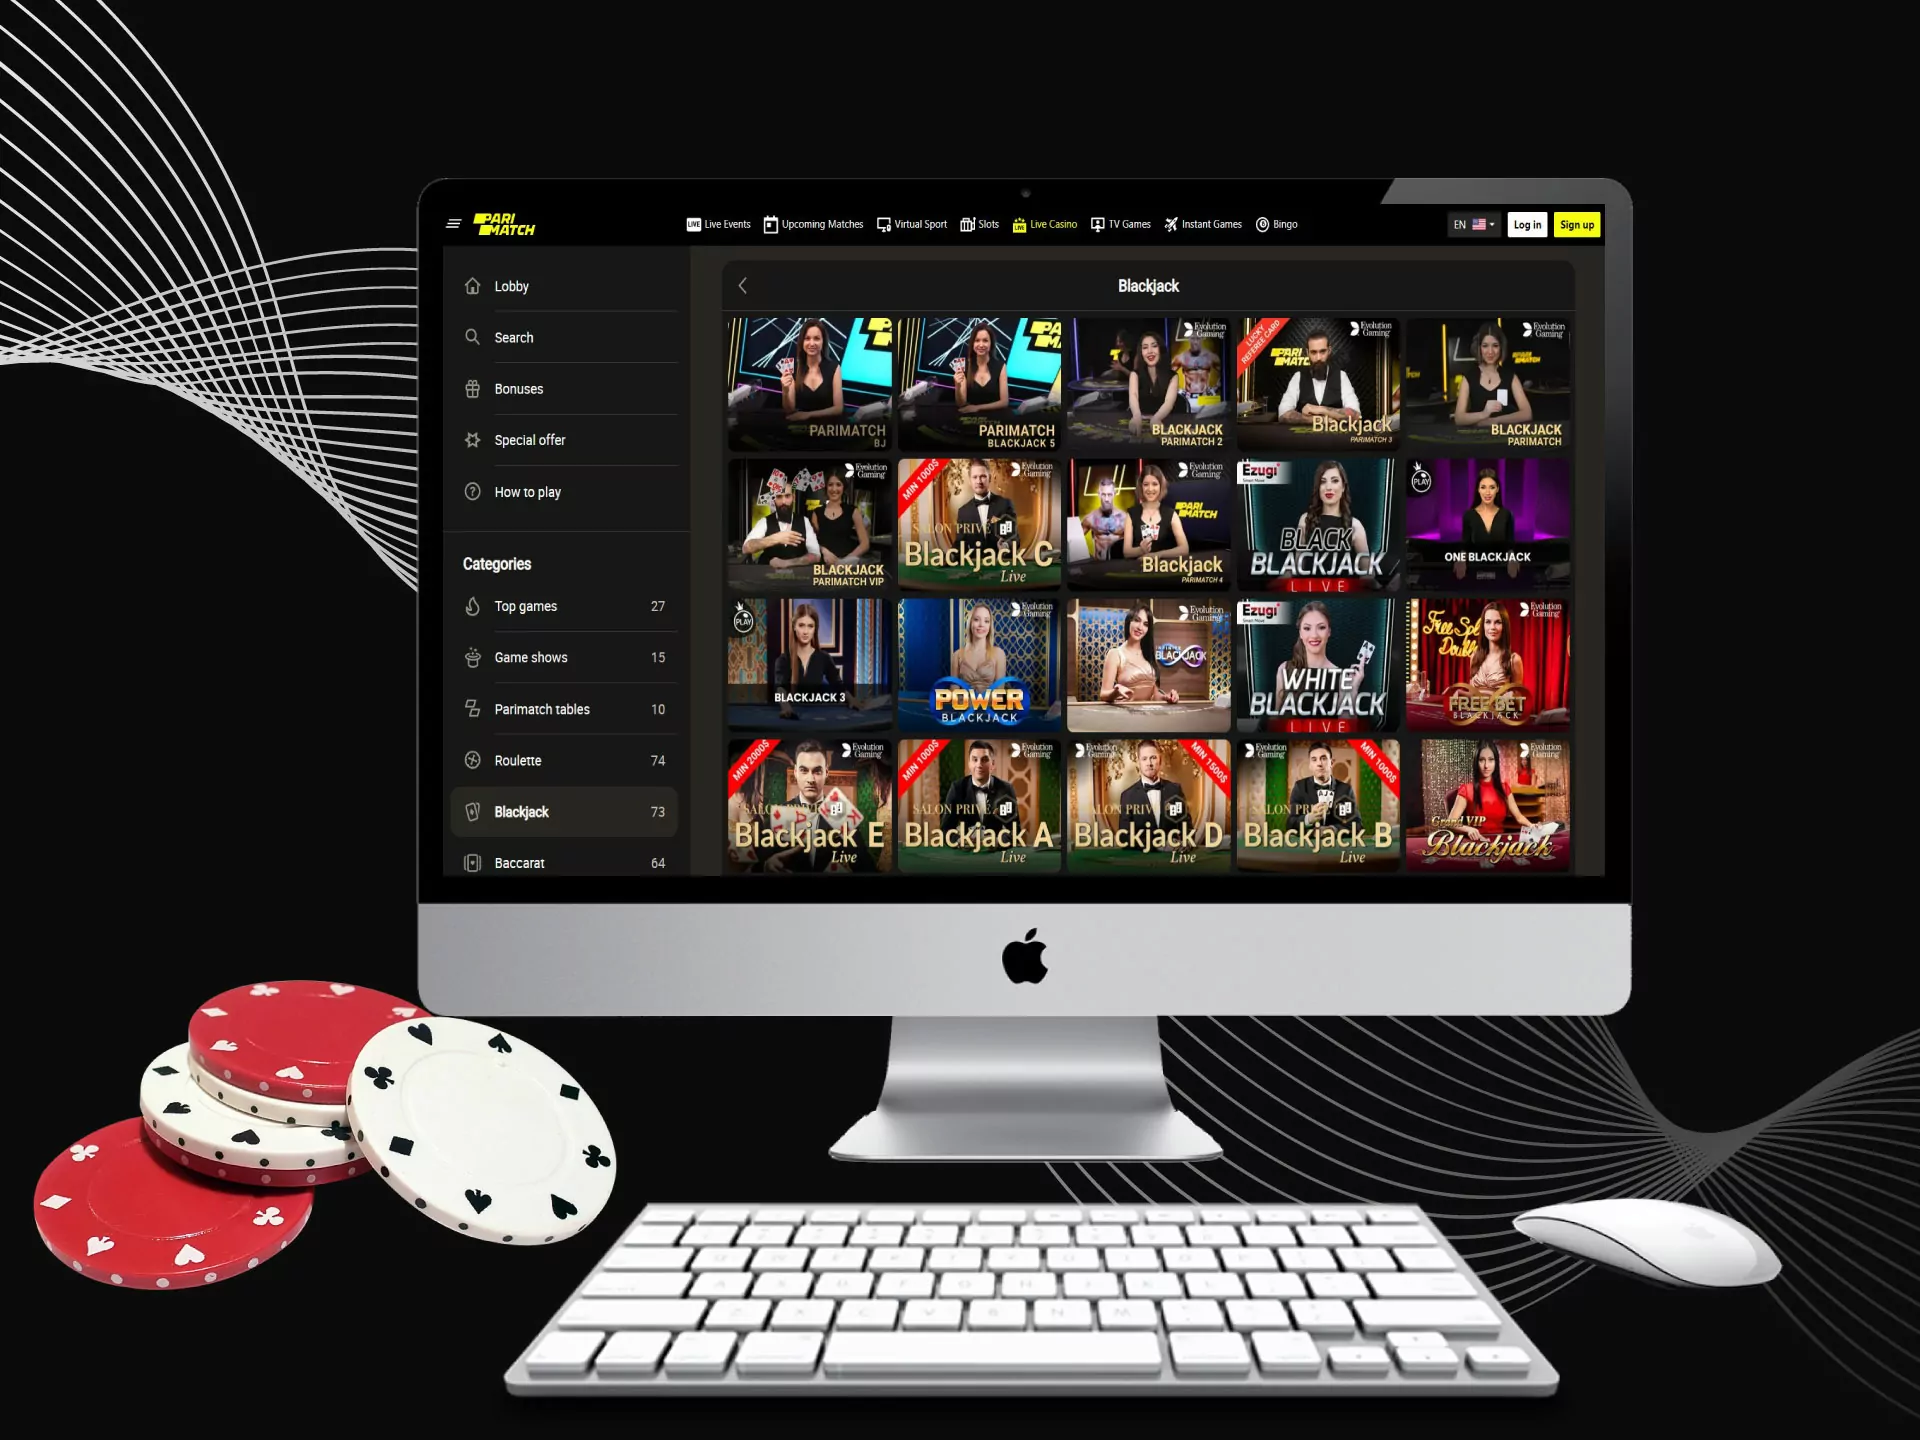 Online casinos provide blackjack from well-known and trustworthy providers.